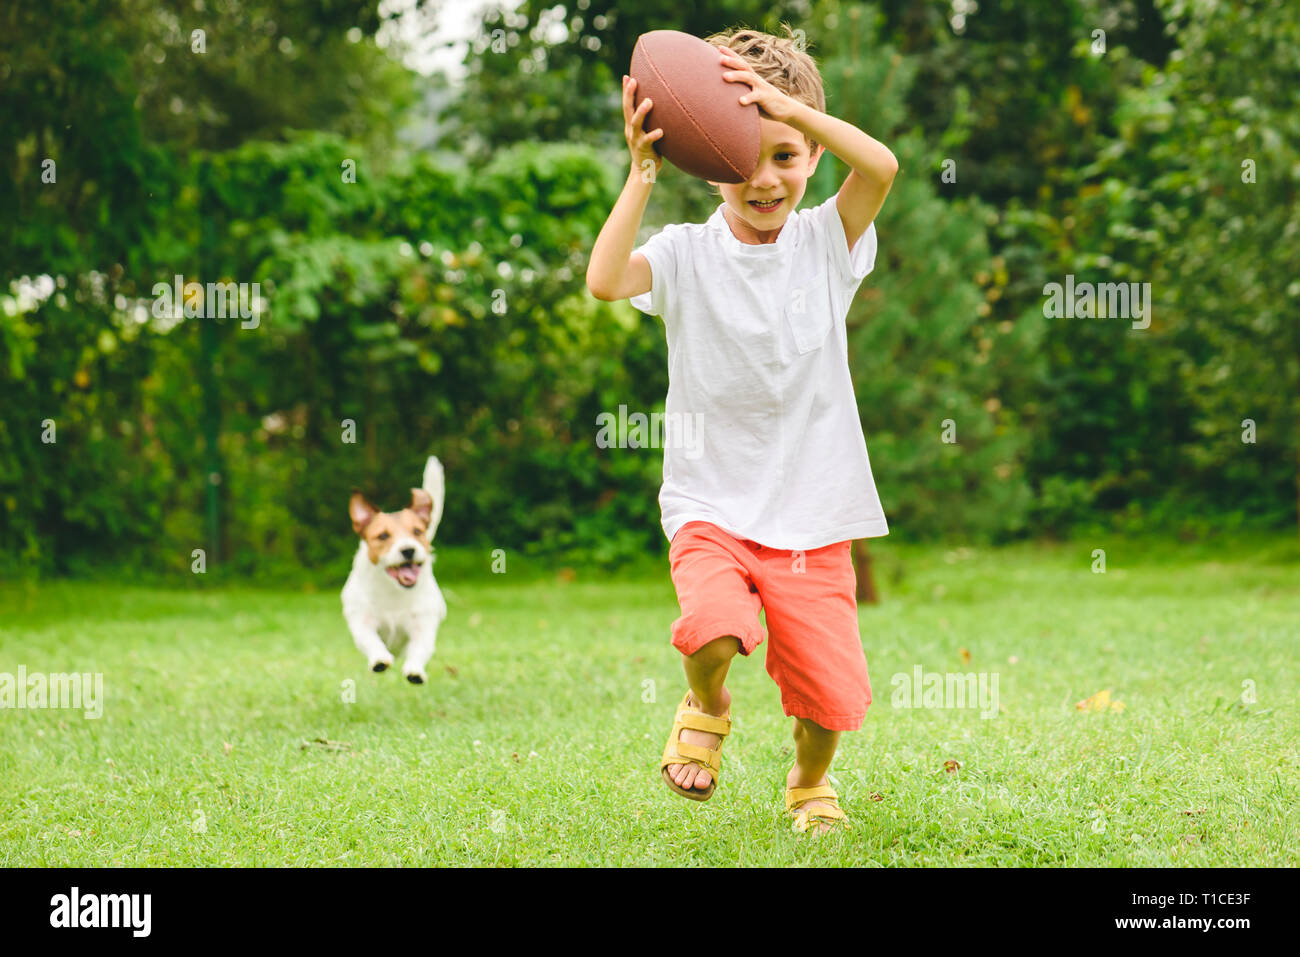 Kid playing american football ready to make touchdown and dog chasing him Stock Photo